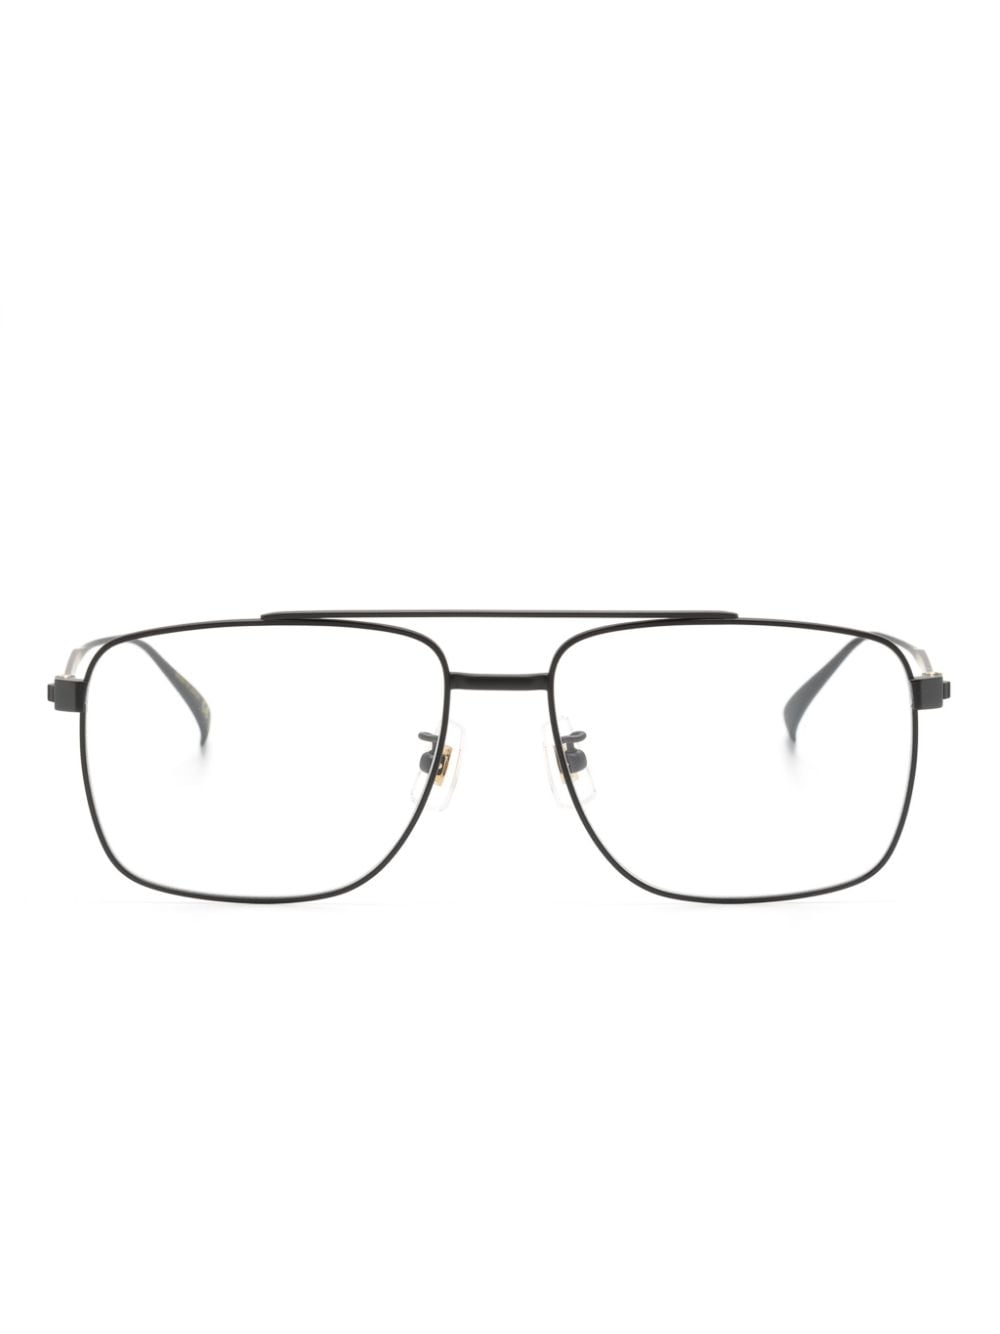 Image 1 of Dunhill Brille mit Pilotengestell